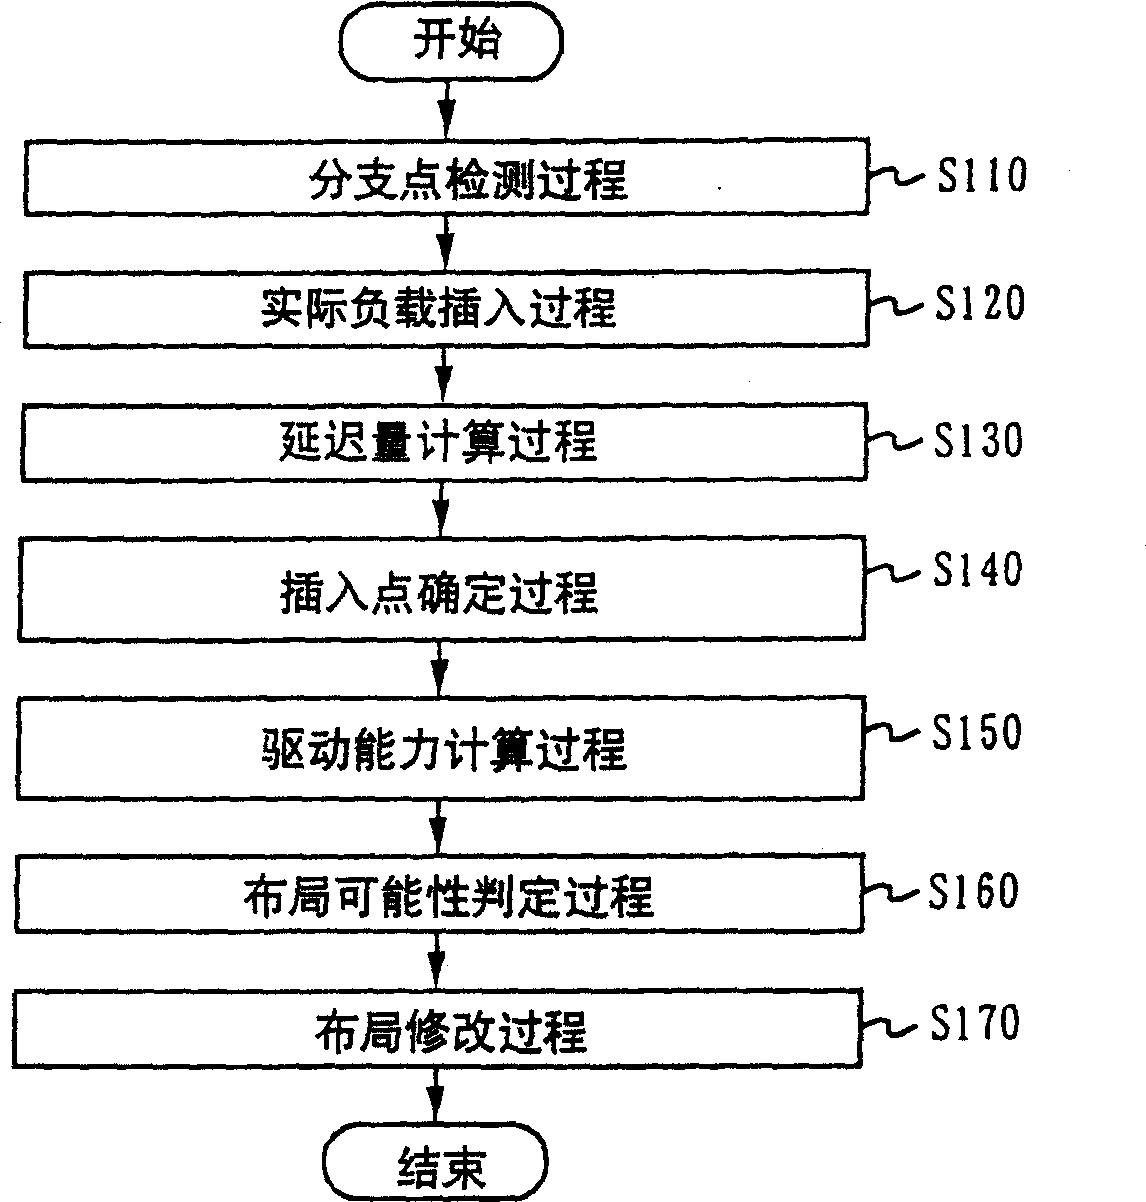 Method of designing low power consumption semiconductor integrated circuit